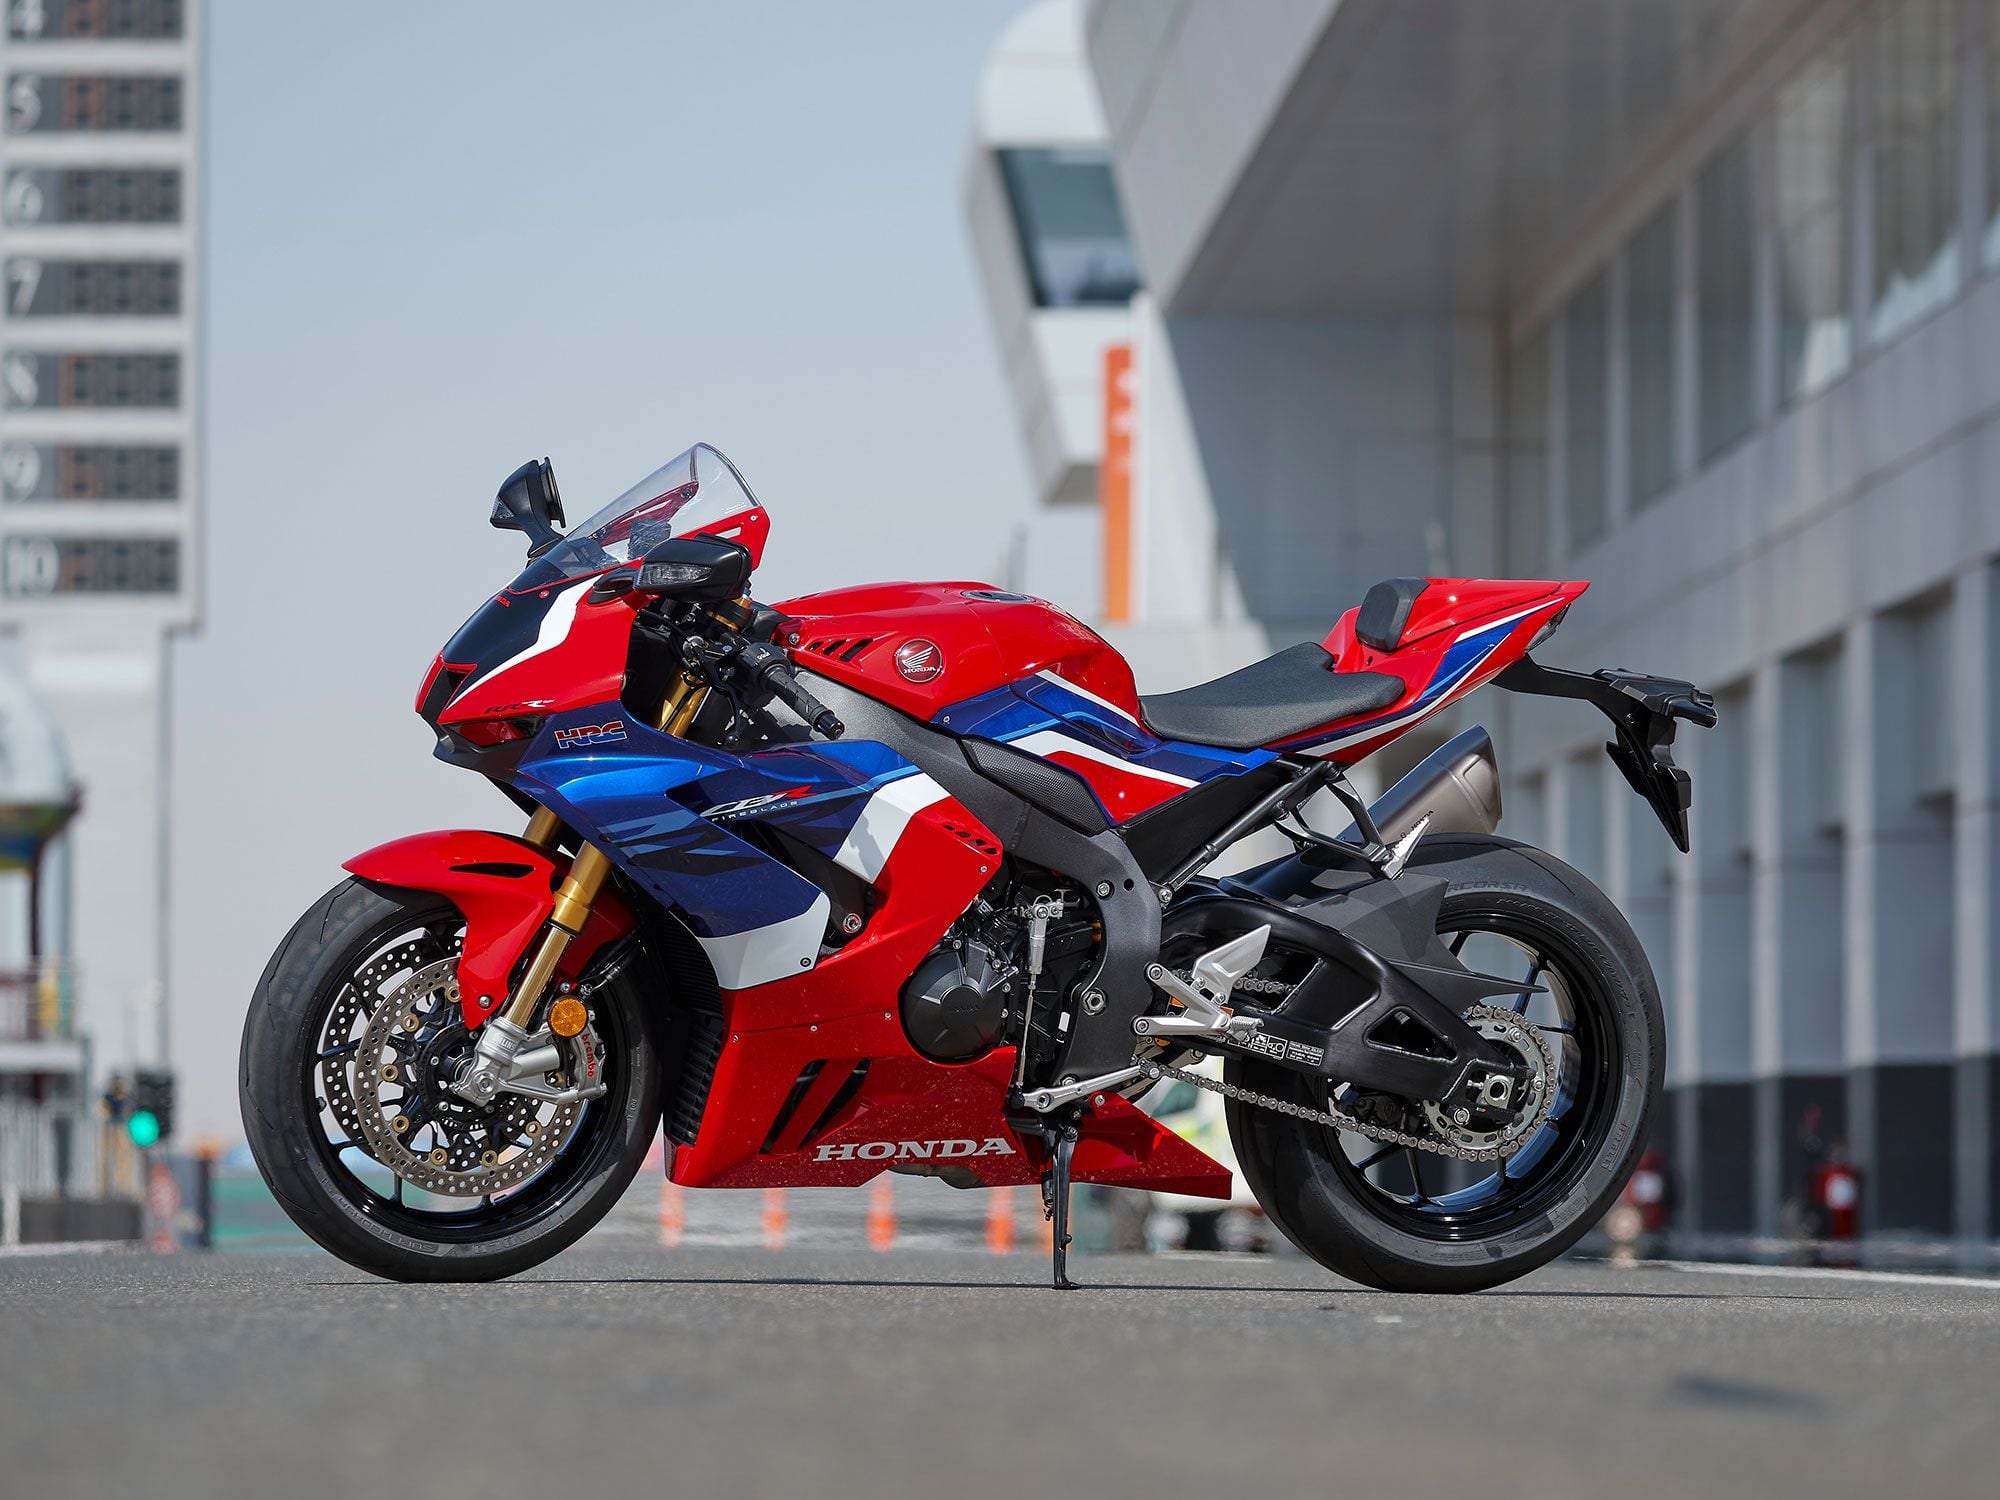 The 2021 Honda CBR1000RR-R Fireblade SP is a premium model and is priced as such. This model is available for $28,500 in limited numbers.